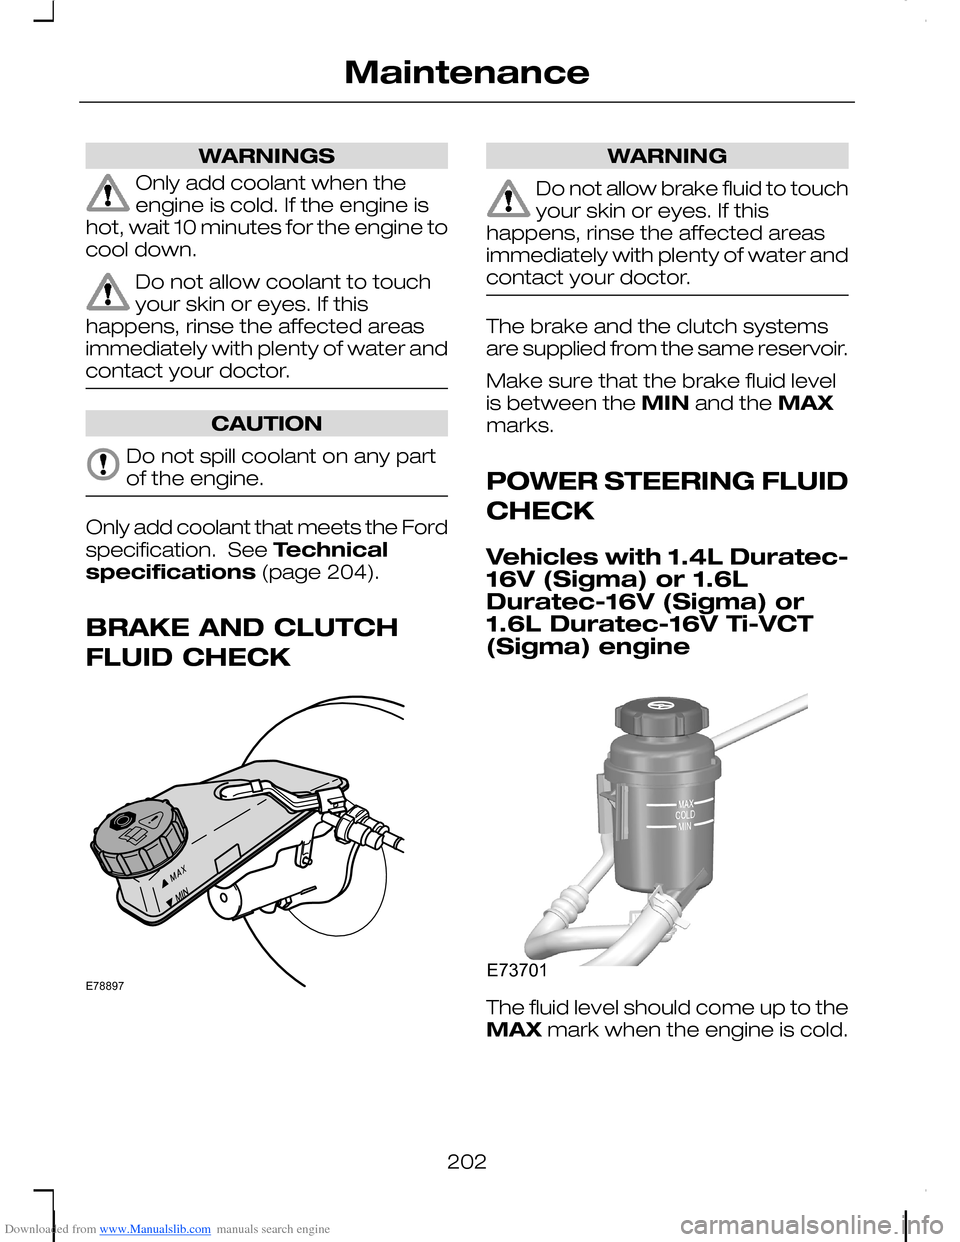 FORD C MAX 2008 1.G User Guide Downloaded from www.Manualslib.com manuals search engine WARNINGS
Only add coolant when theengine is cold. If the engine ishot, wait 10 minutes for the engine tocool down.
Do not allow coolant to touc